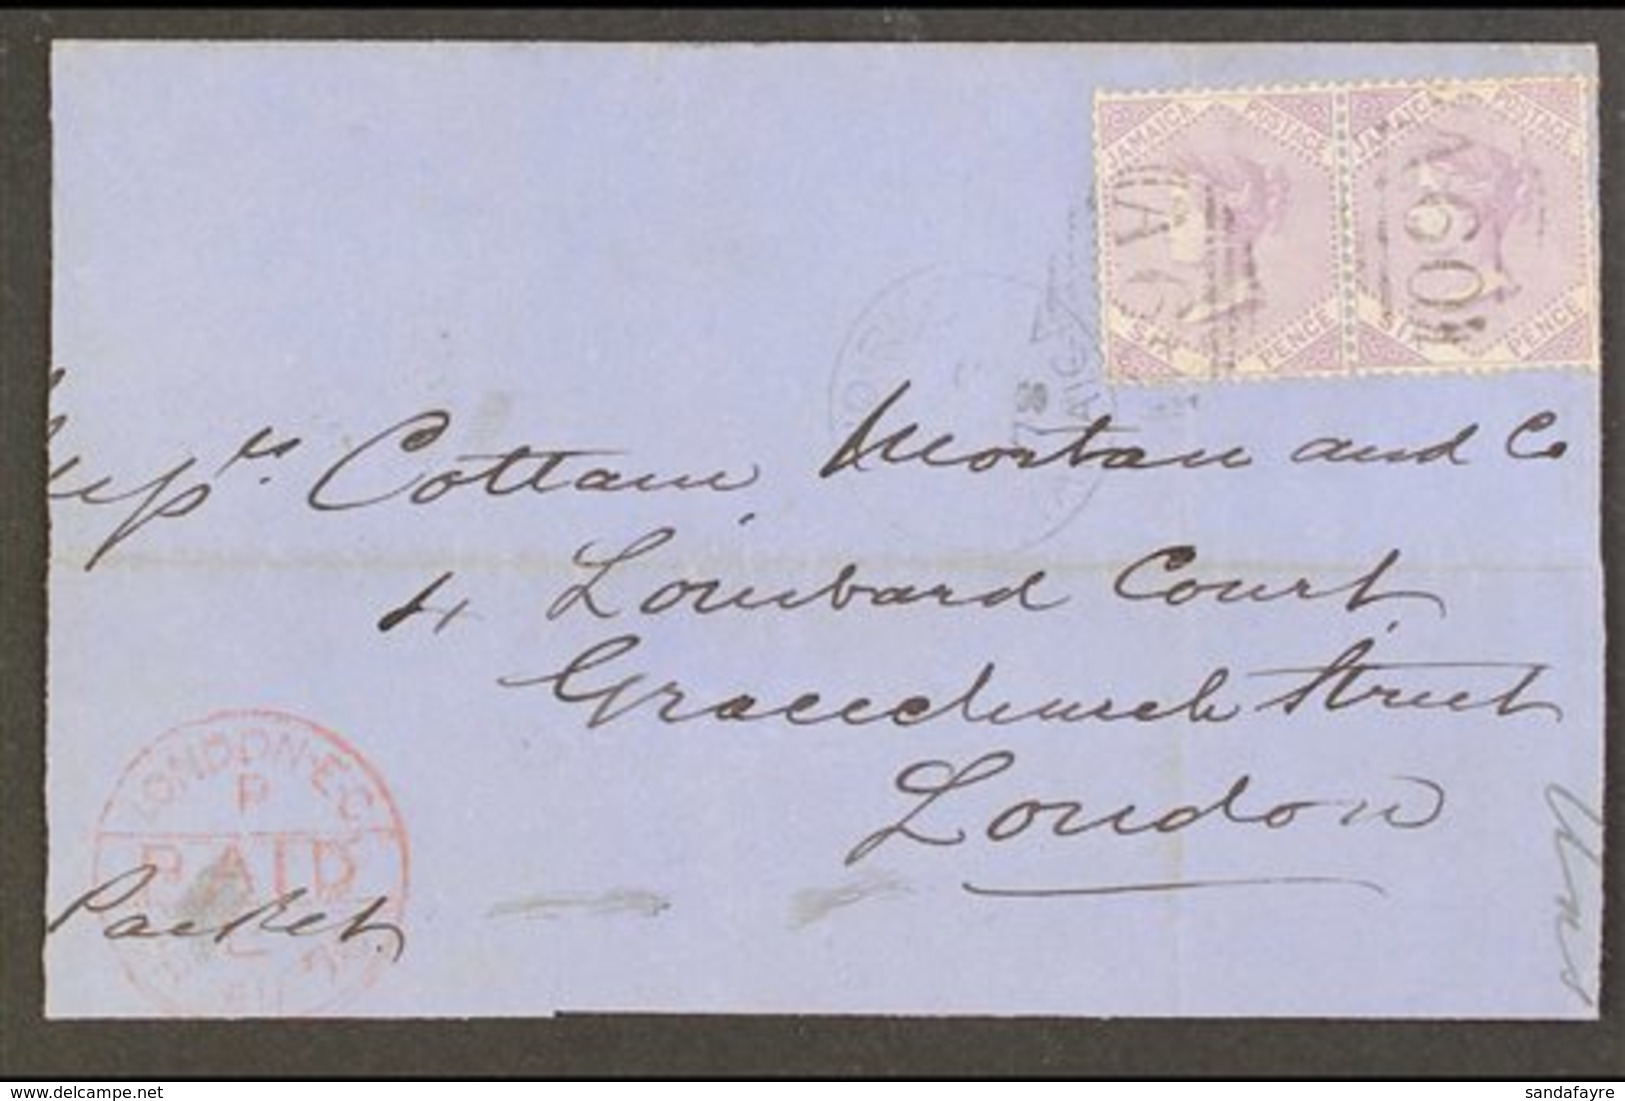 1878  (Aug) Envelope Large Part Front & Back To London, Bearing 6d Pair Tied A60 Cancels, Ocho Rios Cds Alongside And On - Giamaica (...-1961)